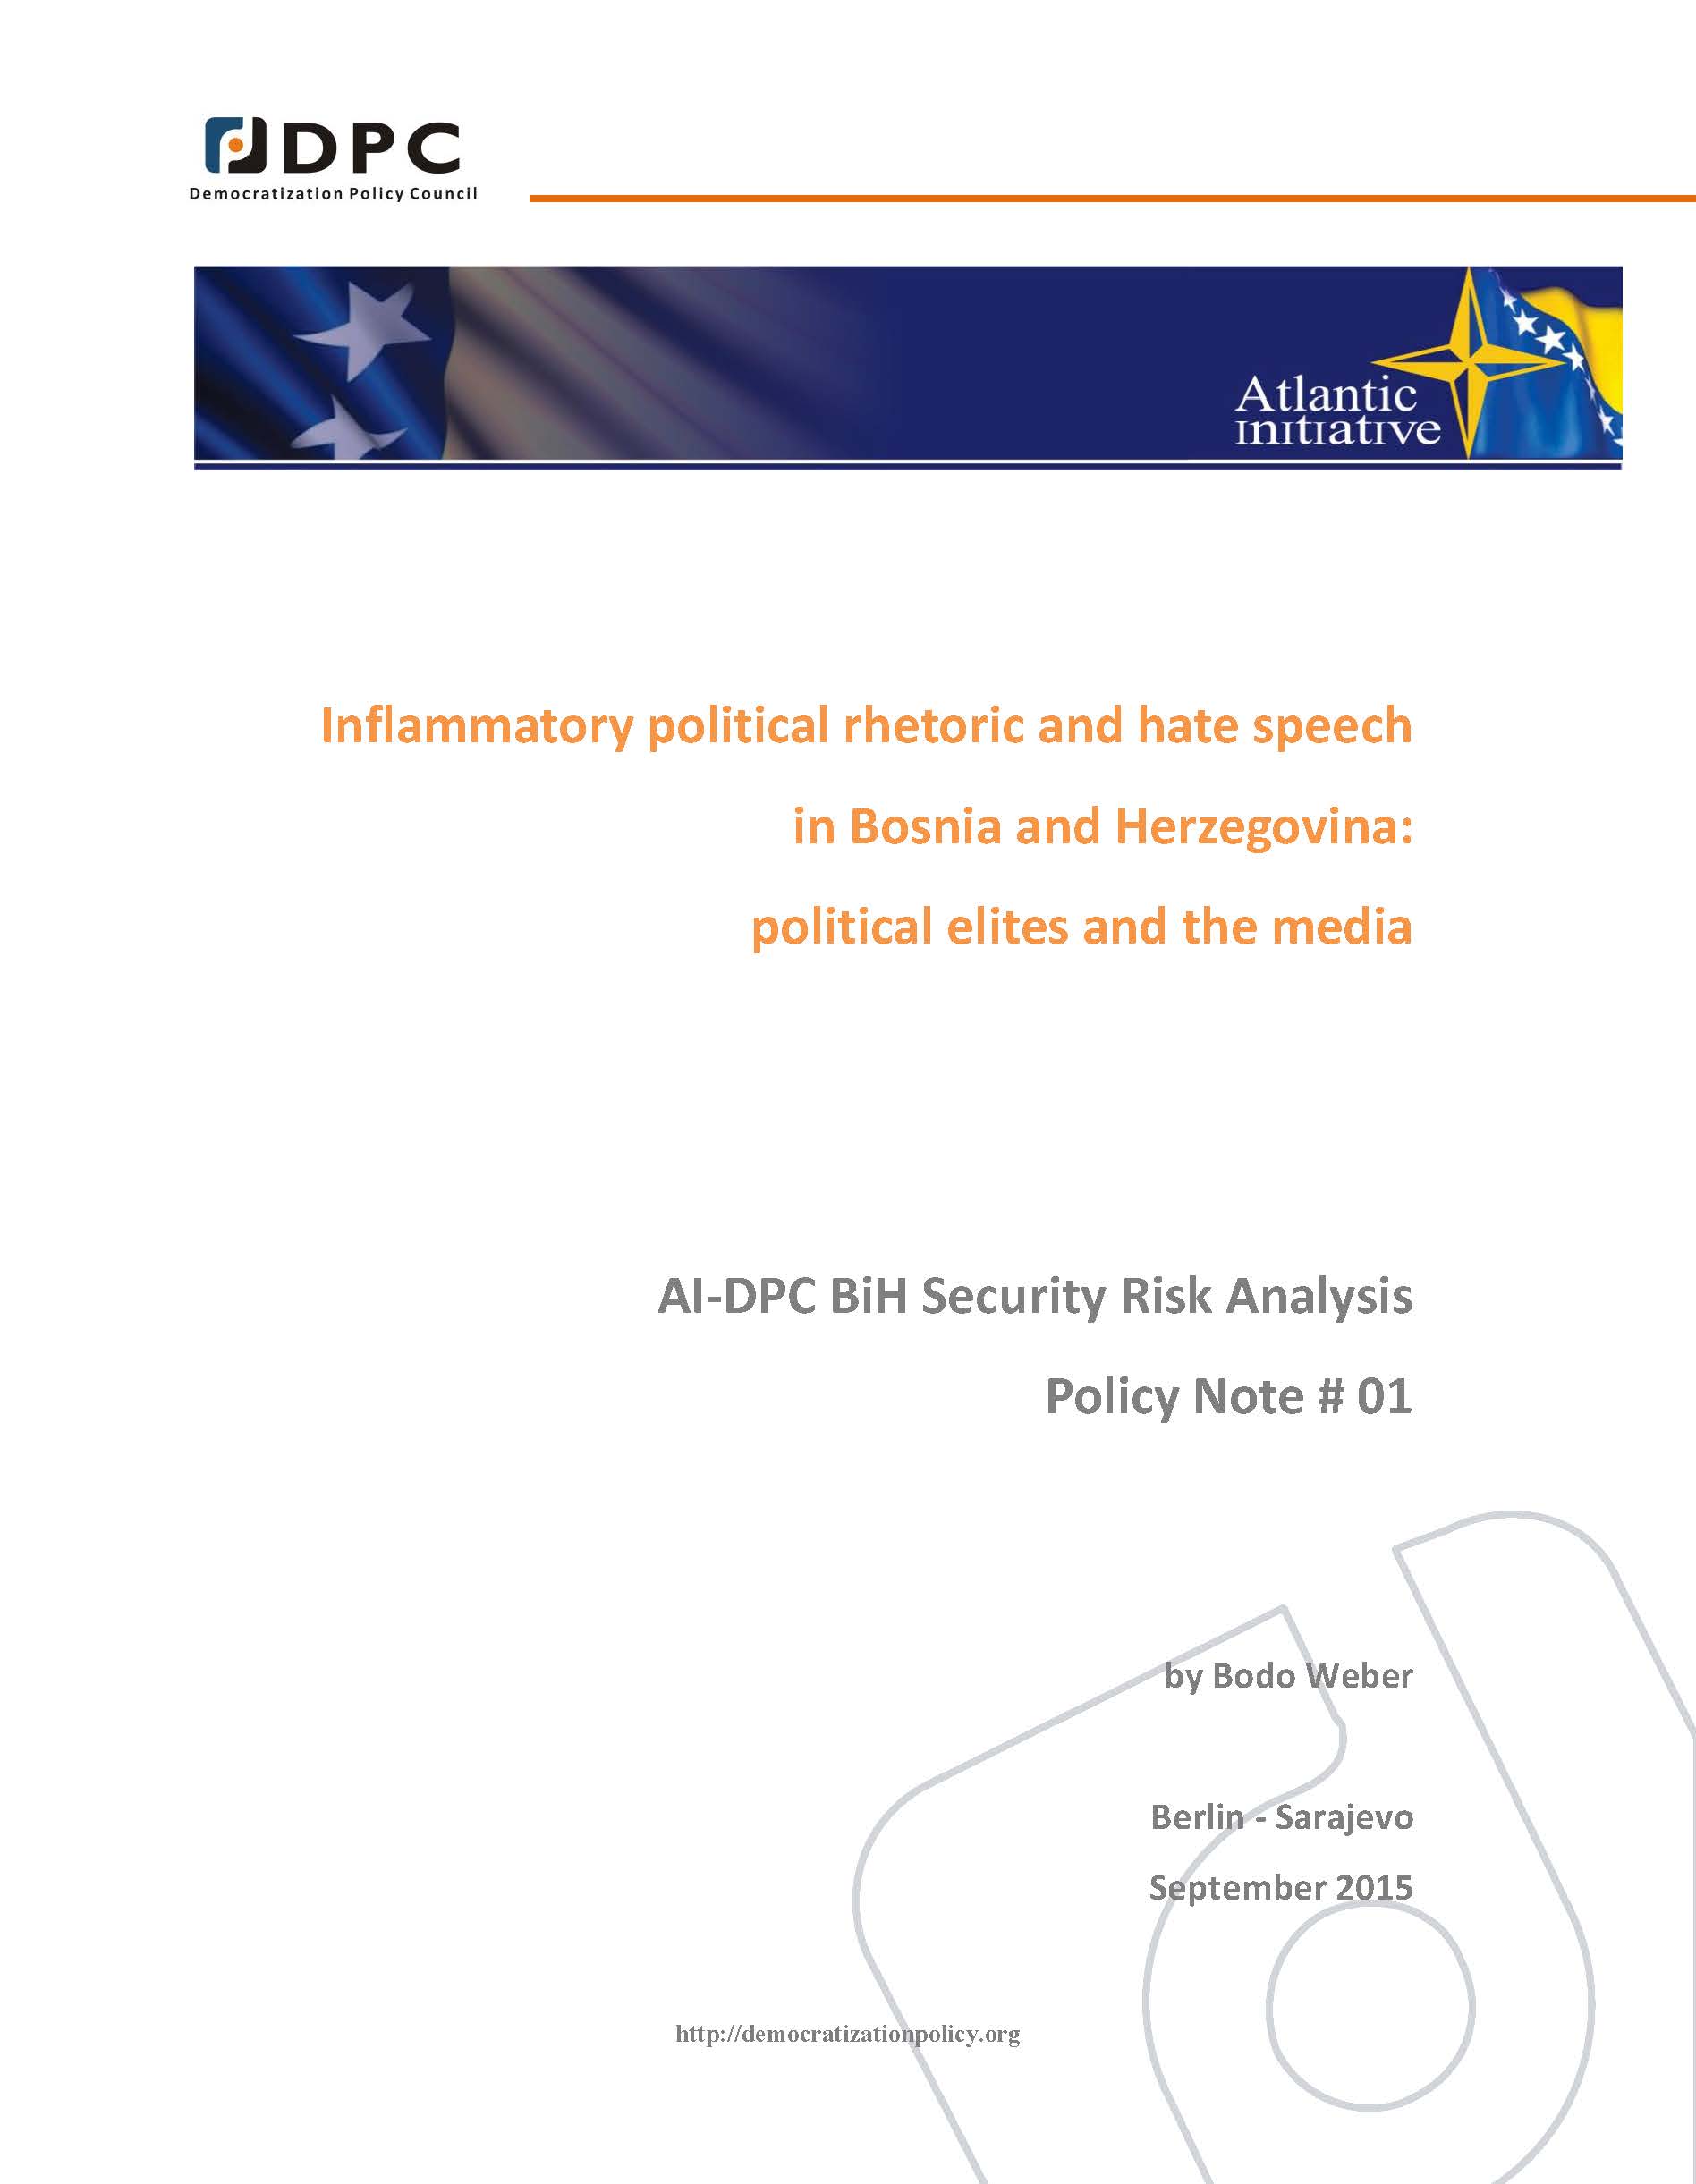 AI-DPC BiH SECURITY ANALYSIS POLICY NOTE 01: Inflammatory political rhetoric and hate speech in Bosnia and Herzegovina: political elites and the media Cover Image